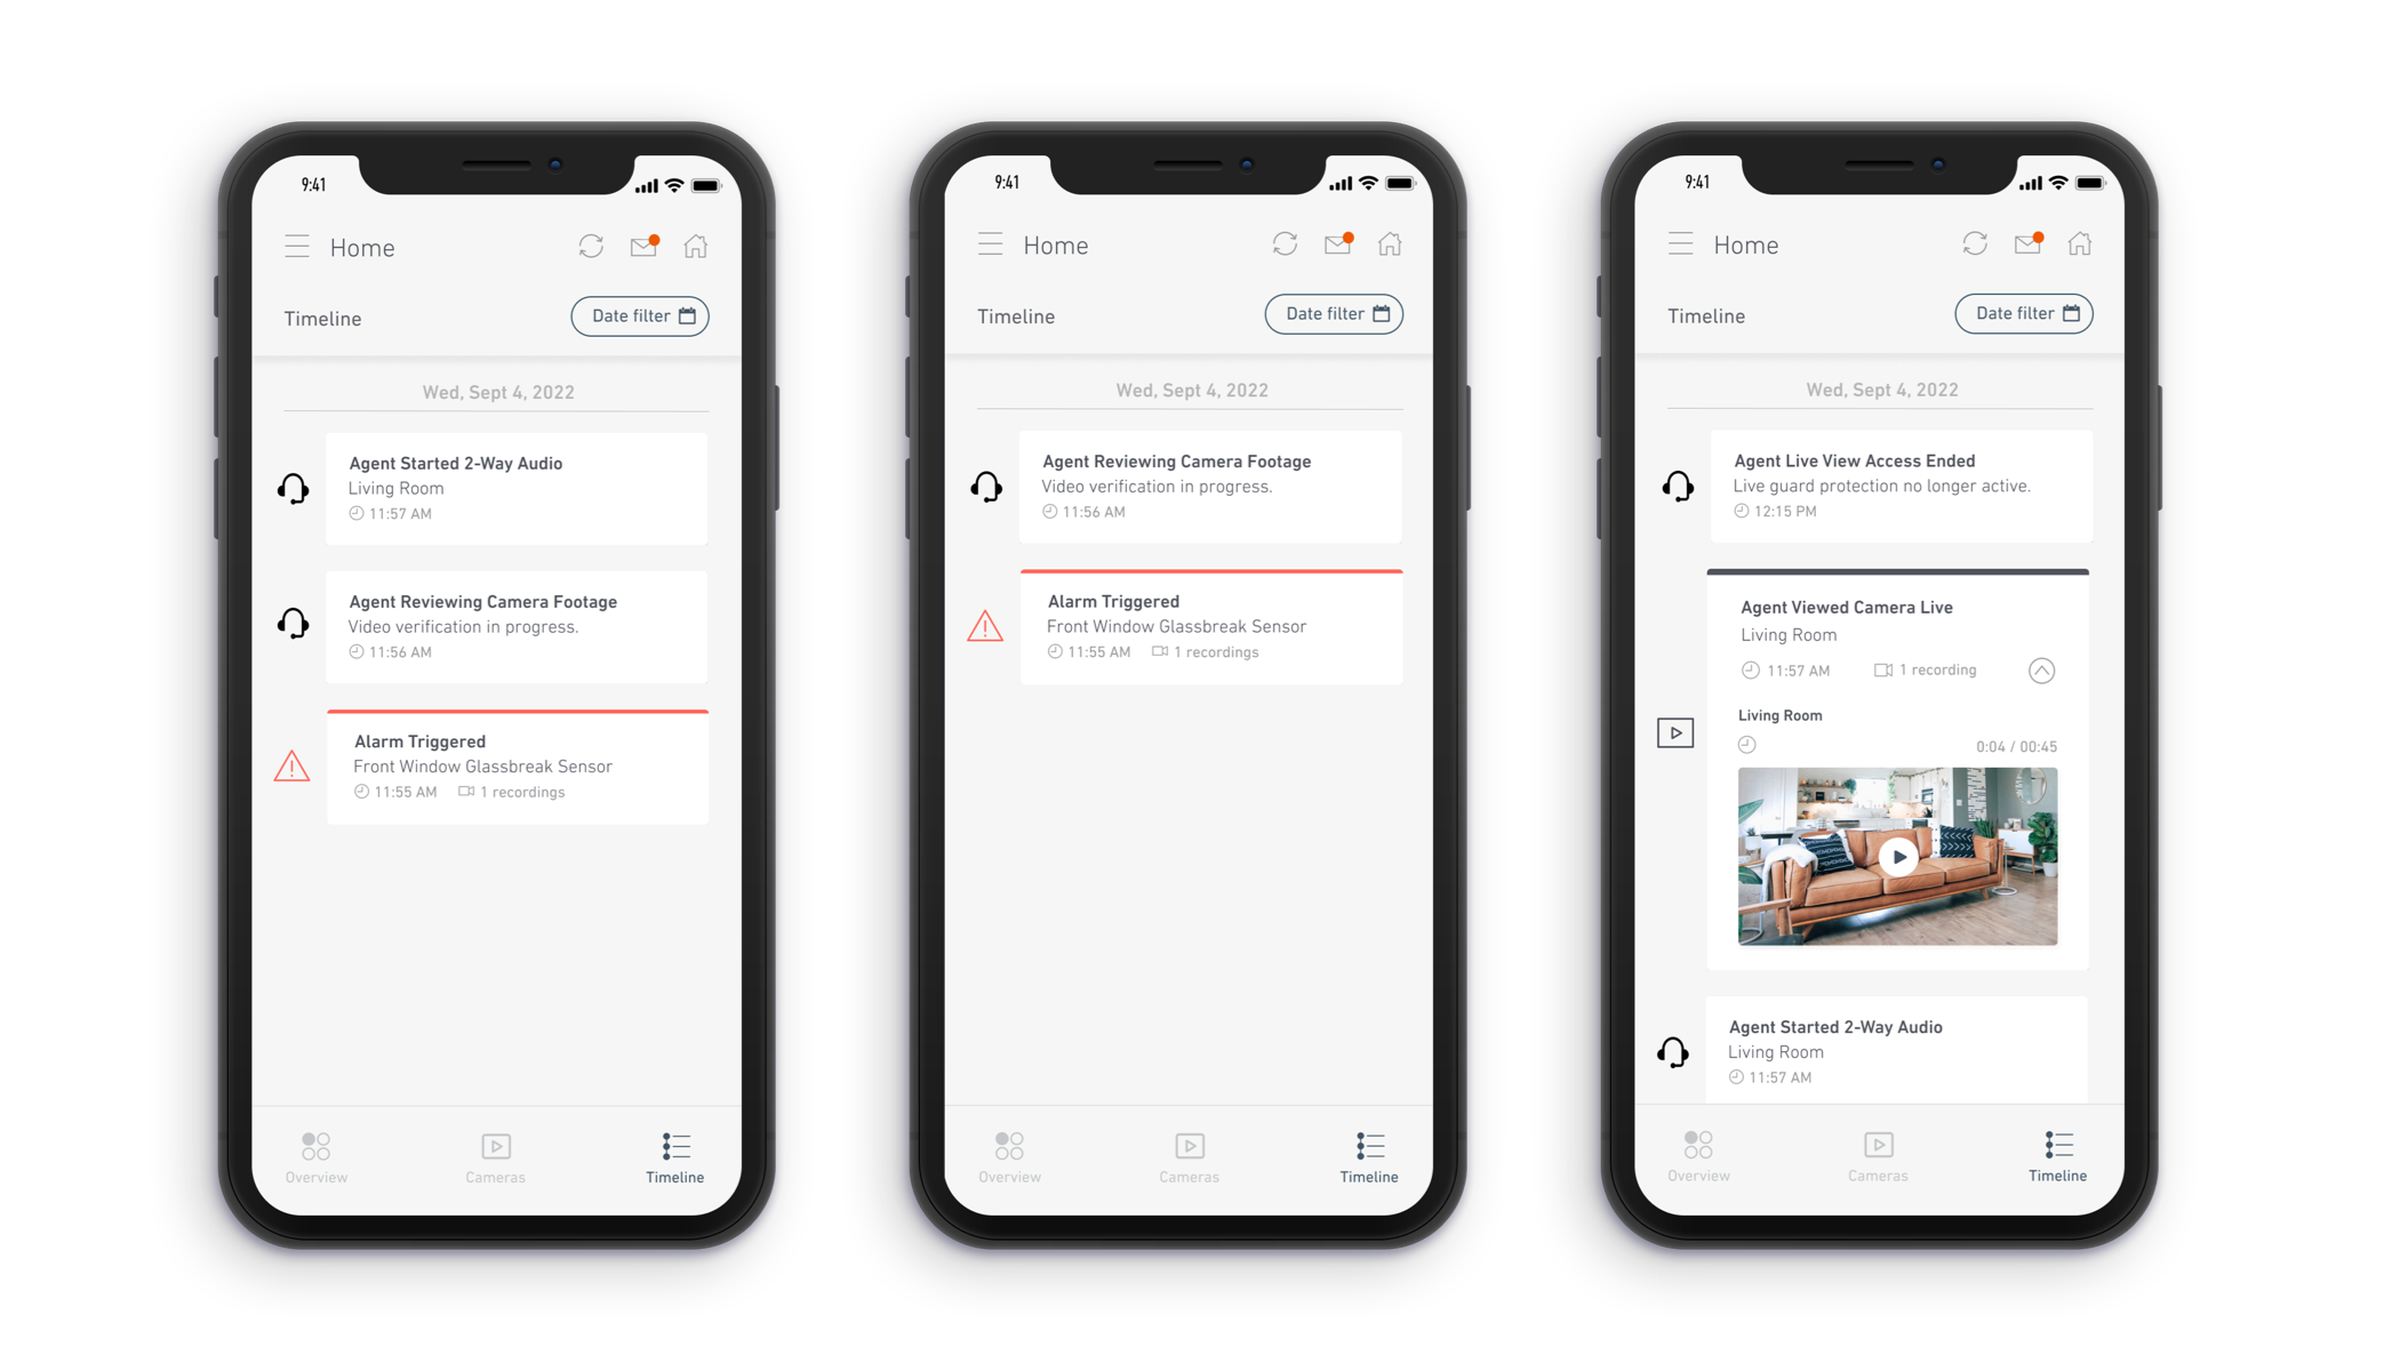 Users can see all live guard interactions within the app, and if they accidentally trigger an alarm, they can use safe words to dismiss the alarm directly with the agent.